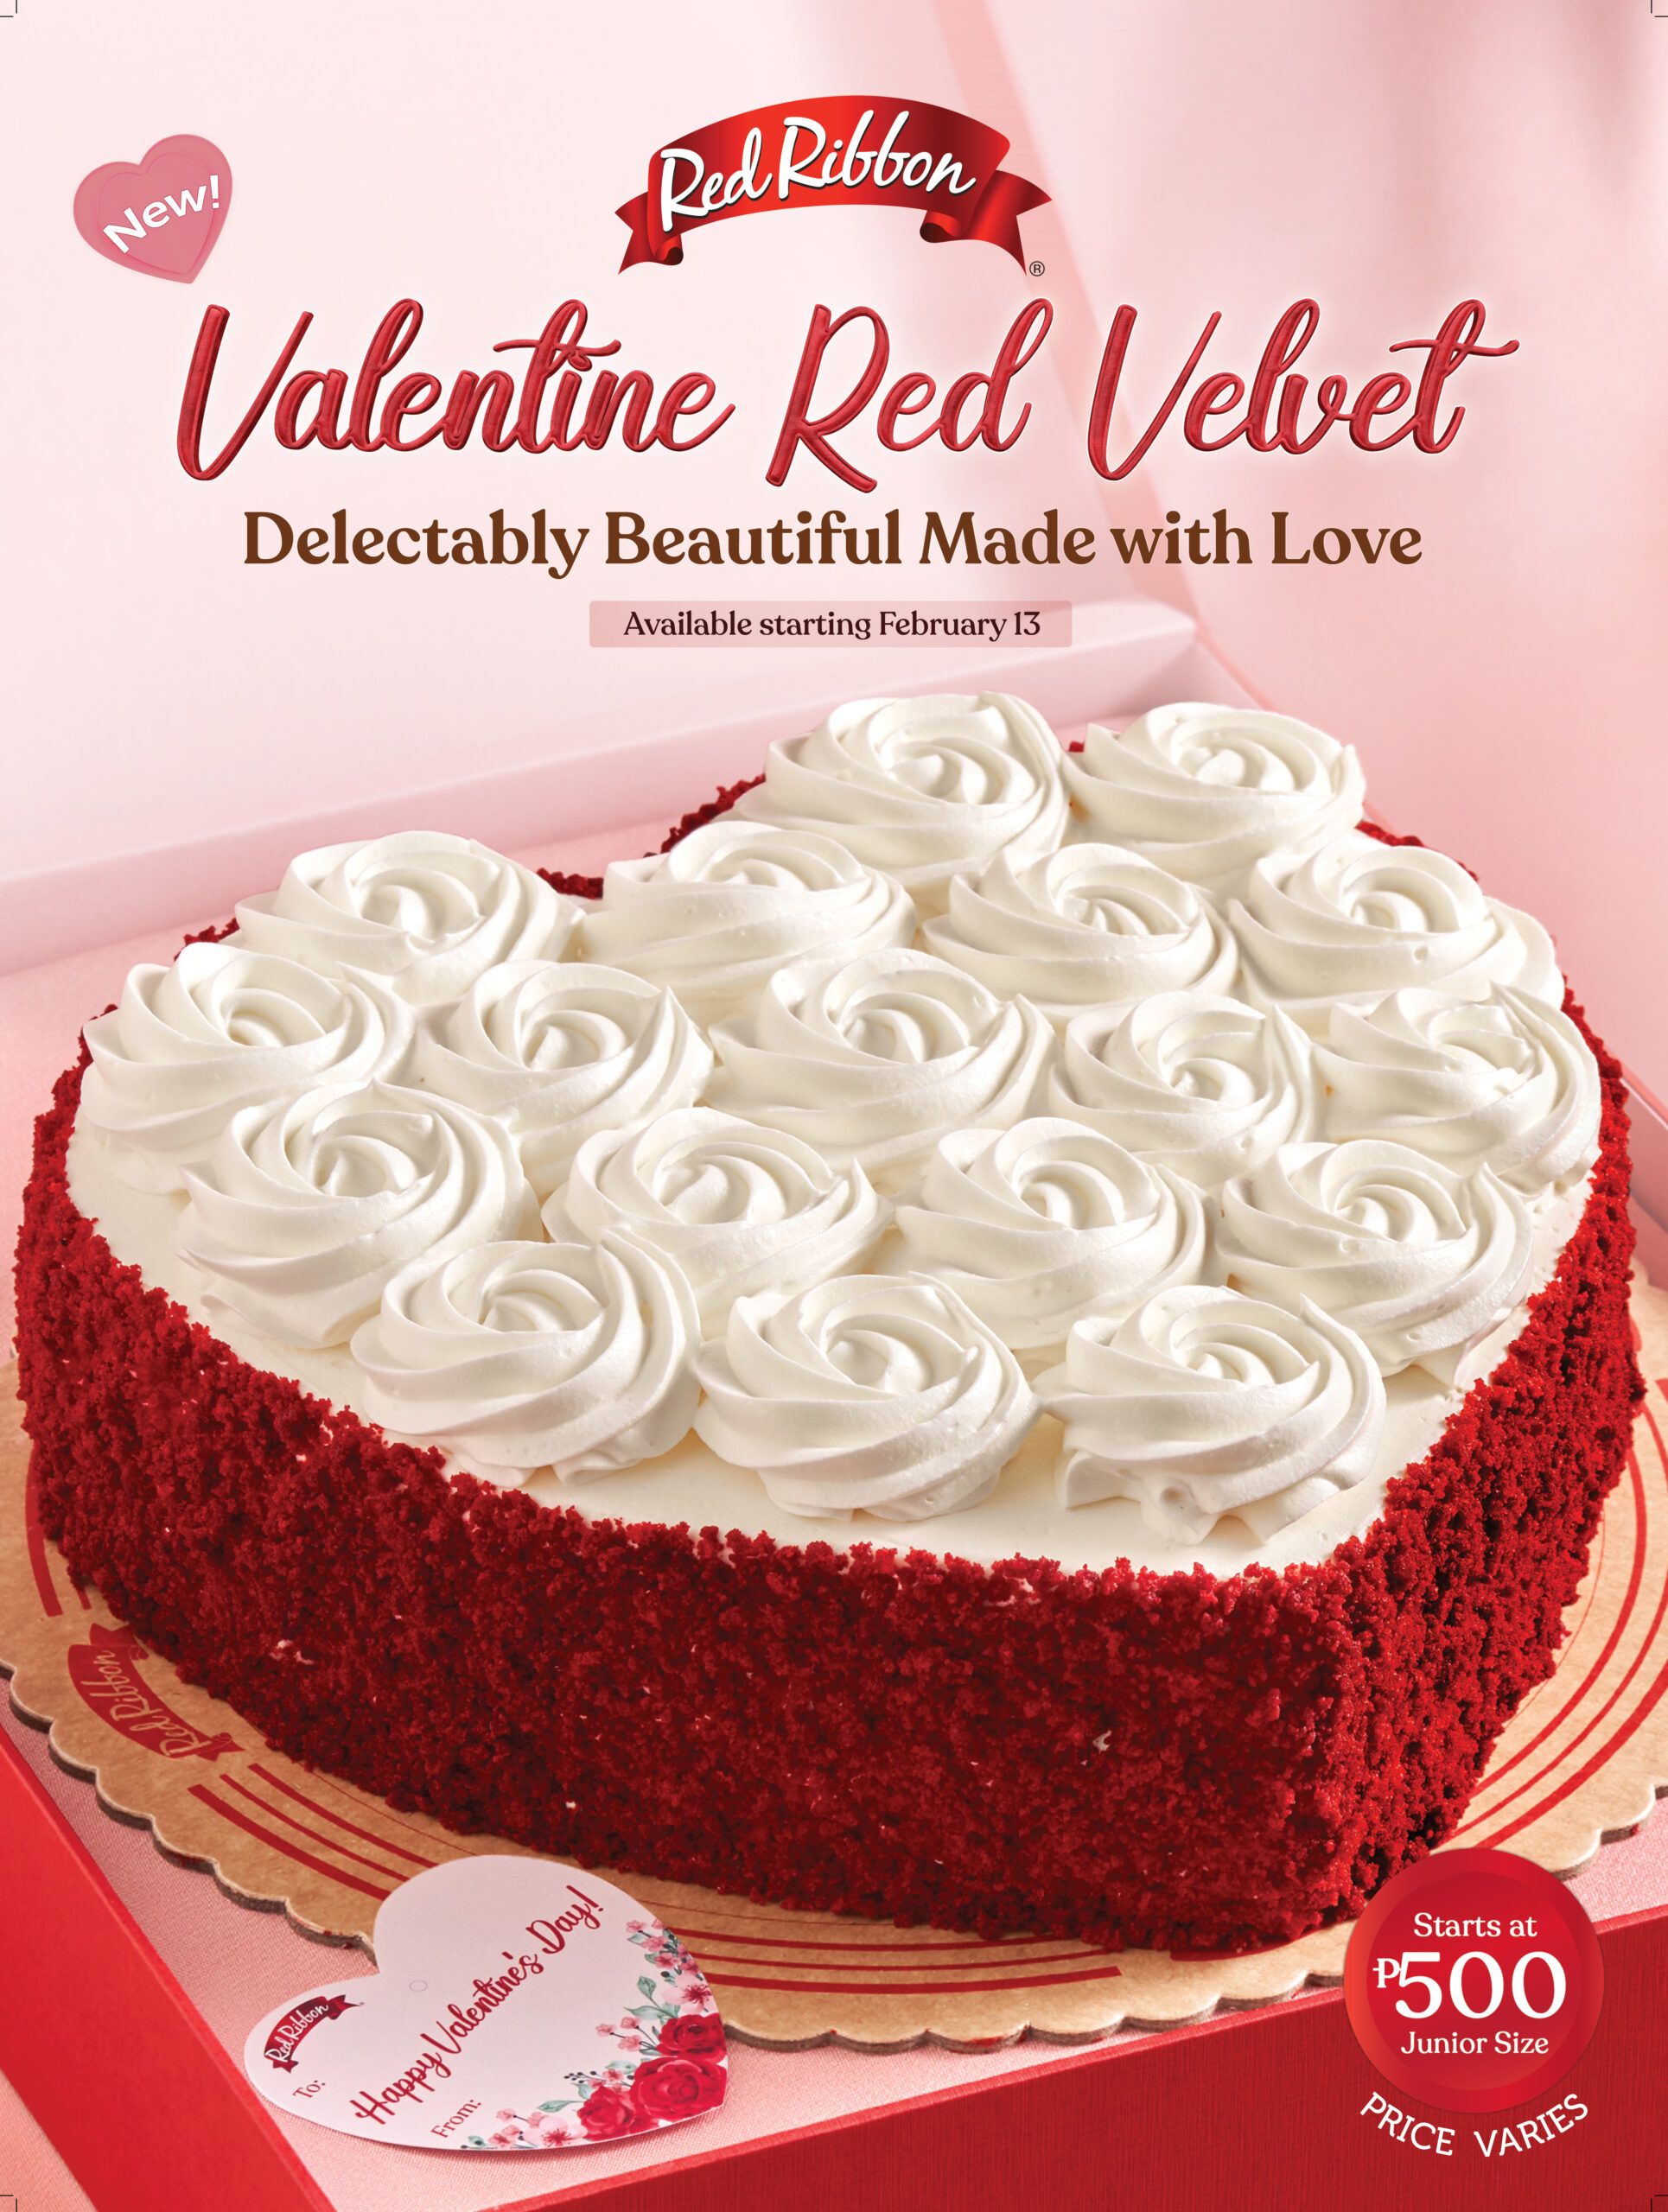 Love Blossoms with Every Bite of Red Ribbon’s New Valentine Red Velvet